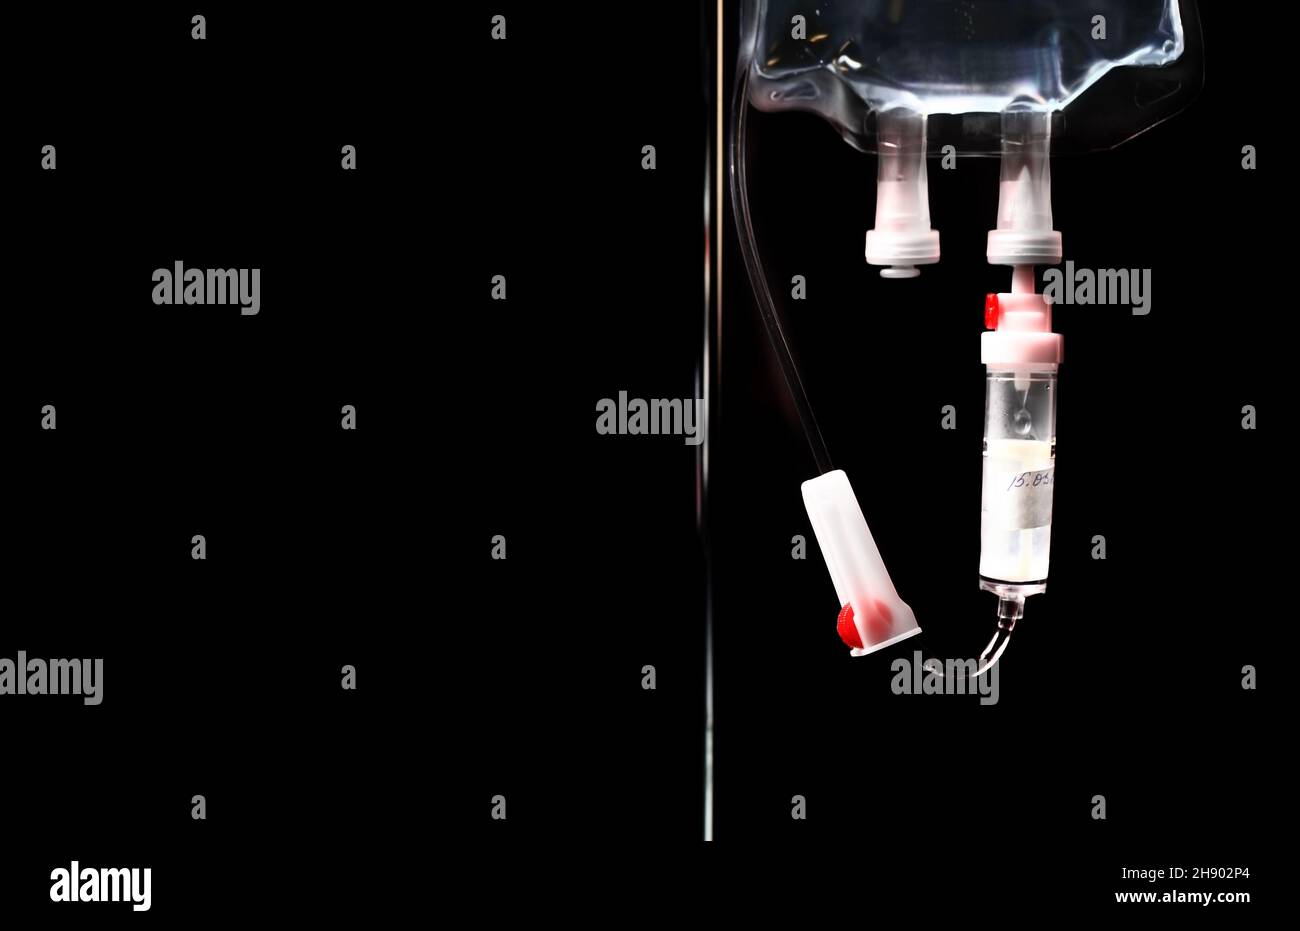 Medical iv drip bag on the black background. Stock Photo